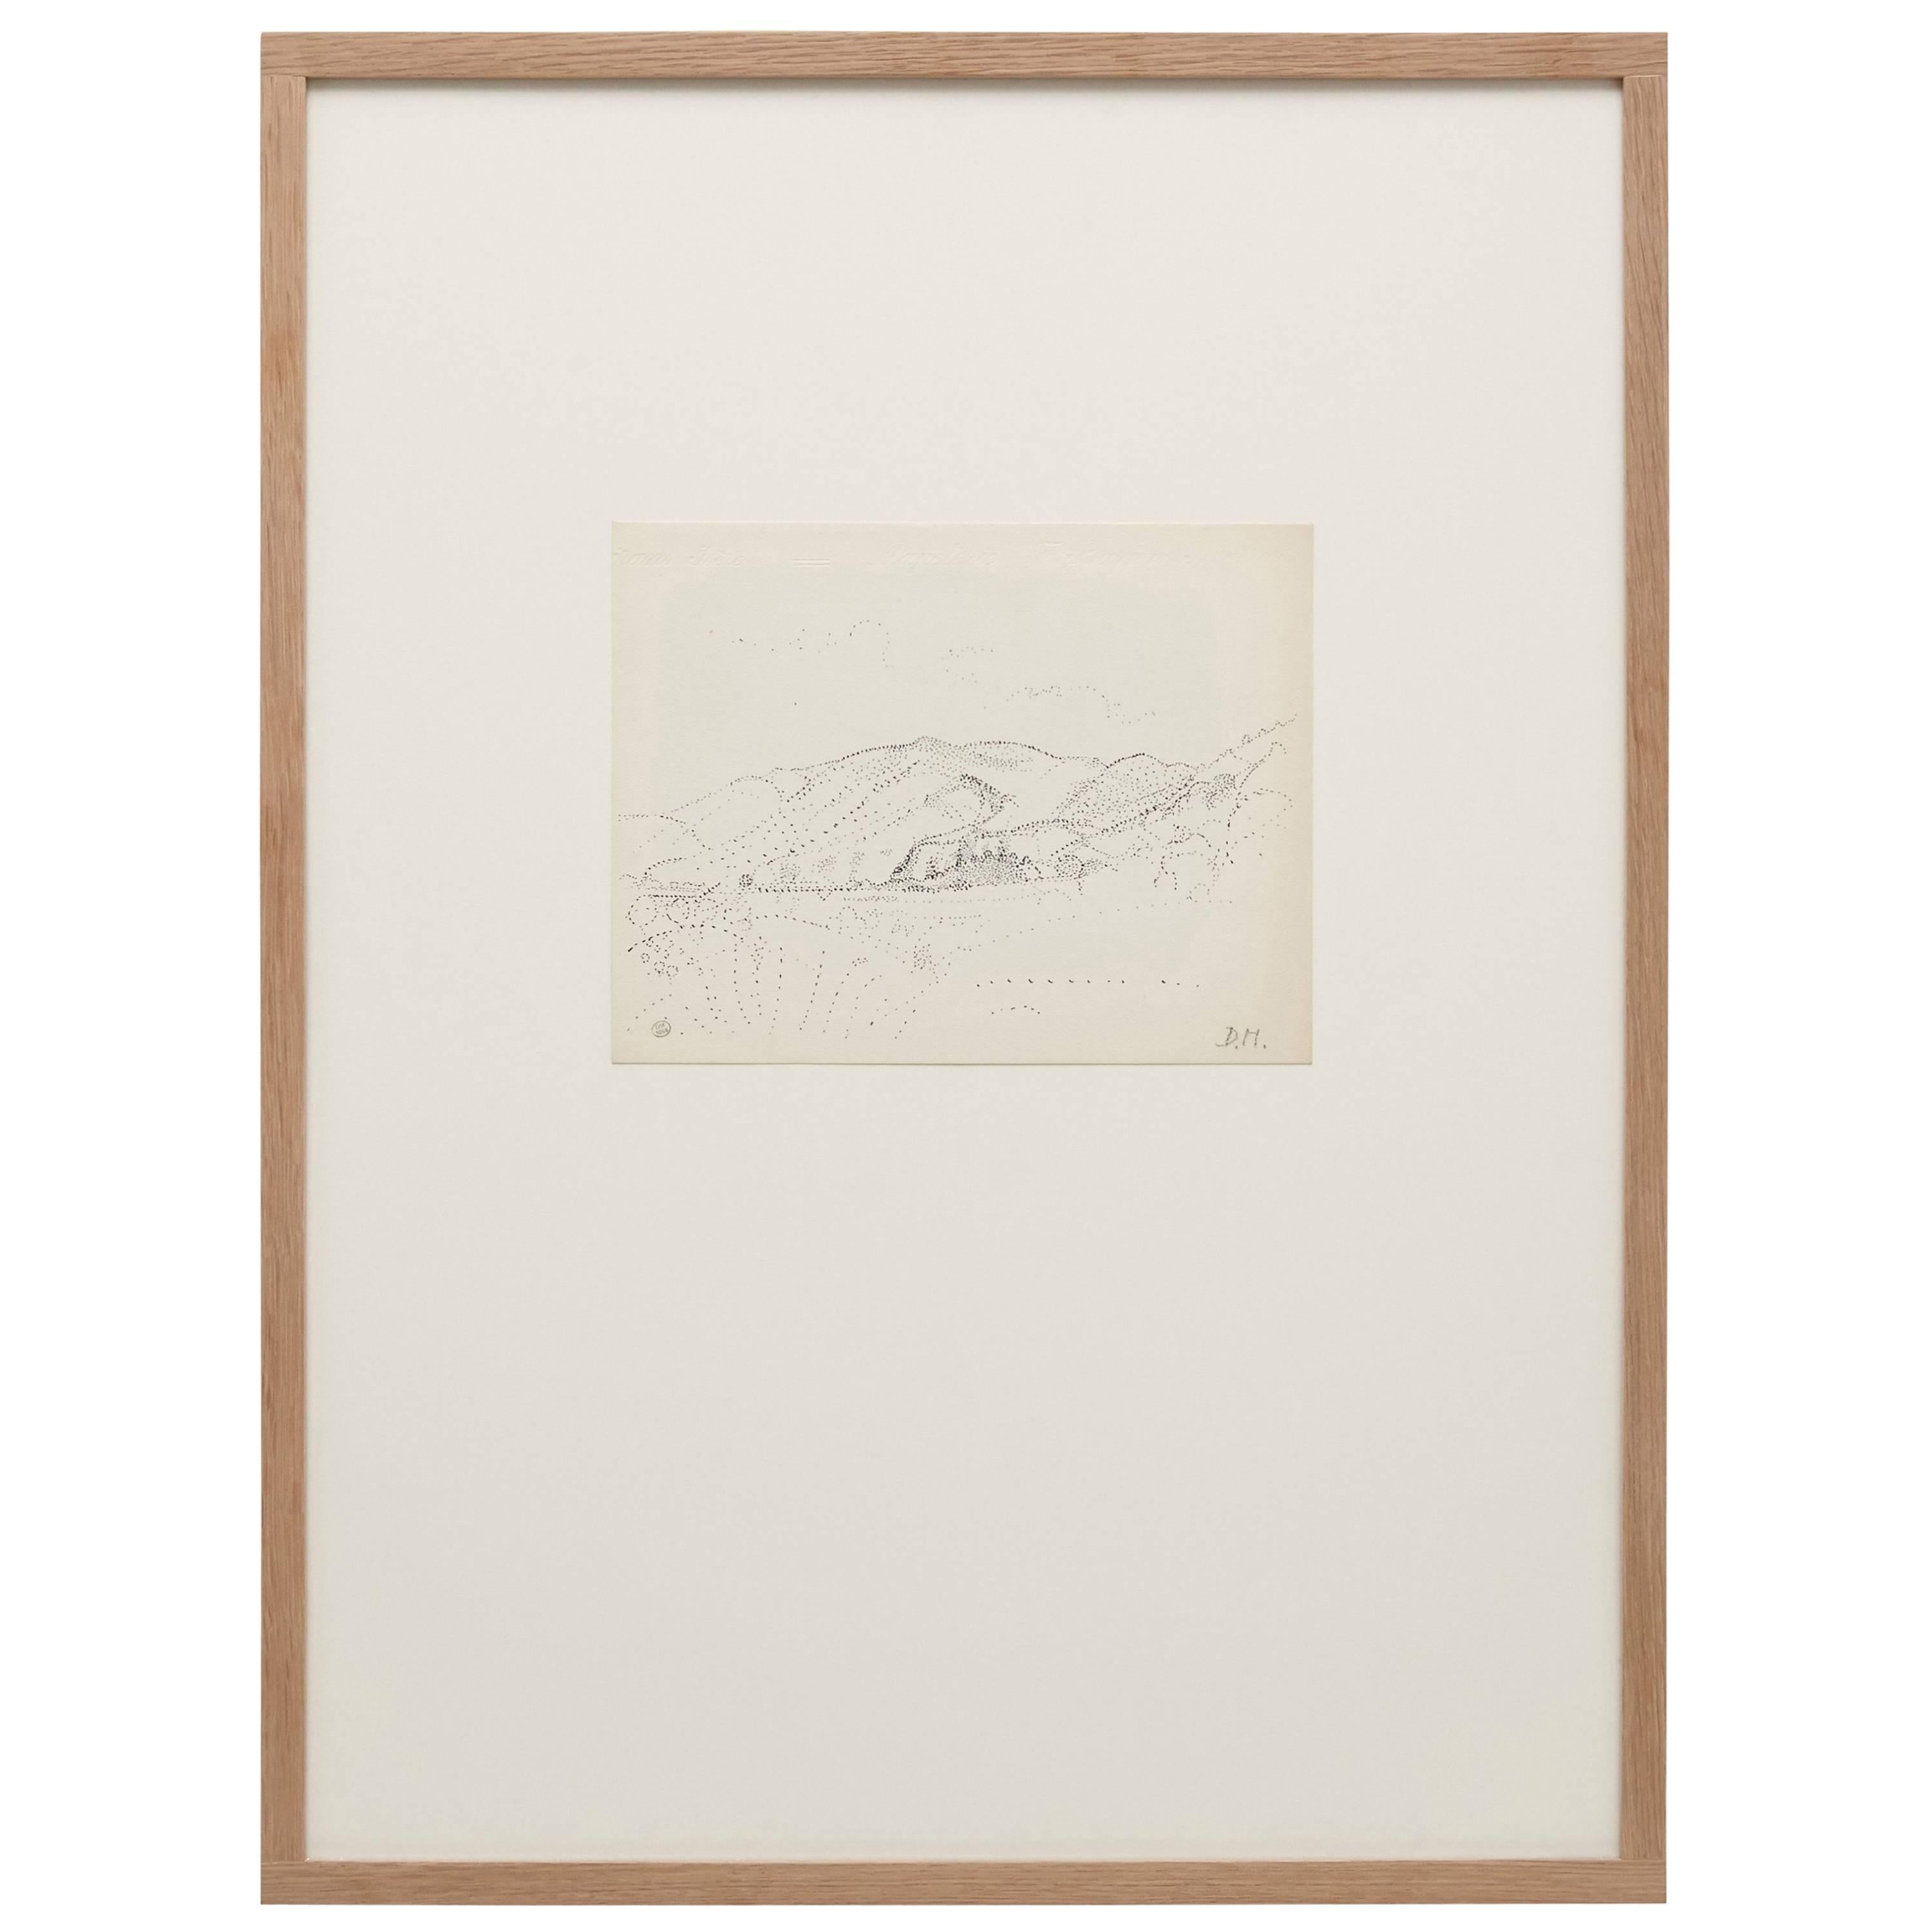 Pointillist composition by Dora Maar, circa 1960.

Hand signed.
Authenticity stamp of the auction that took place in 1998 in Paris.
Black ink on cream white paper.
20th century, undated.
Frame not included.

In good original condition, with